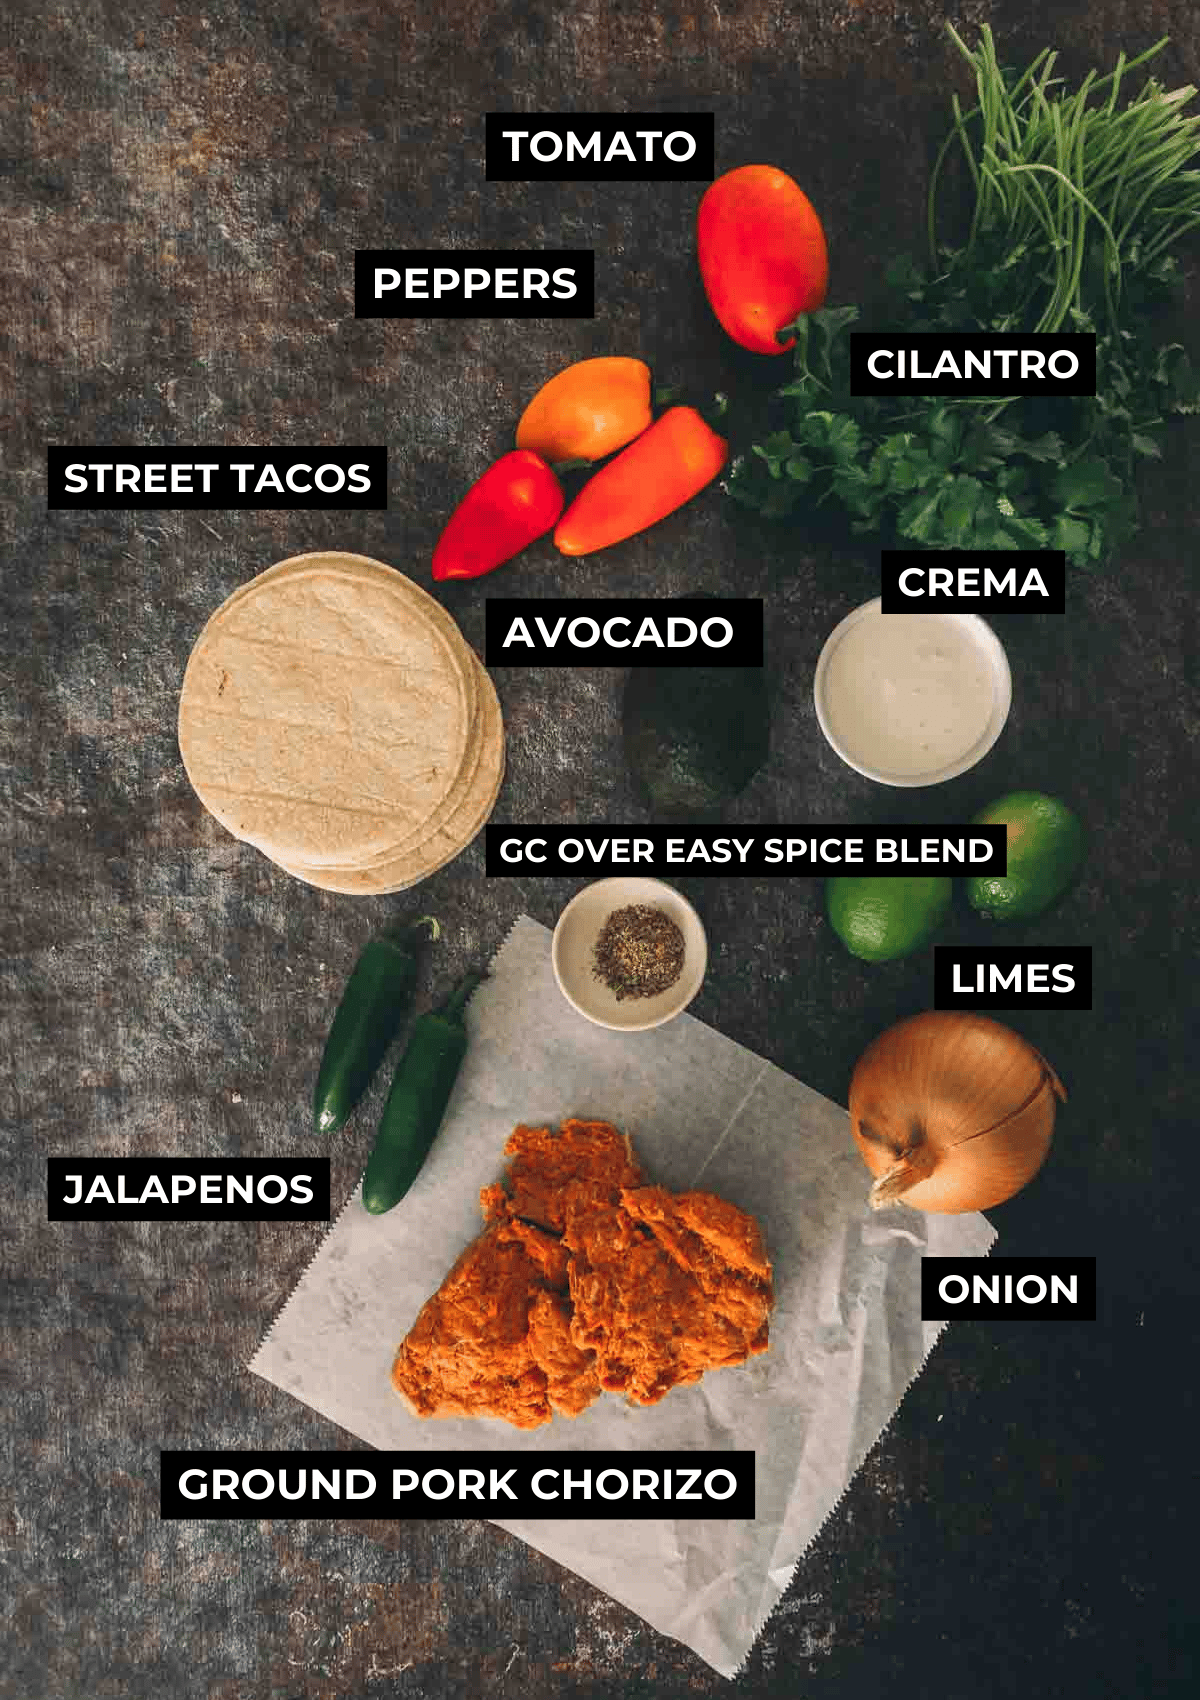 Ingredients for this taco recipe.